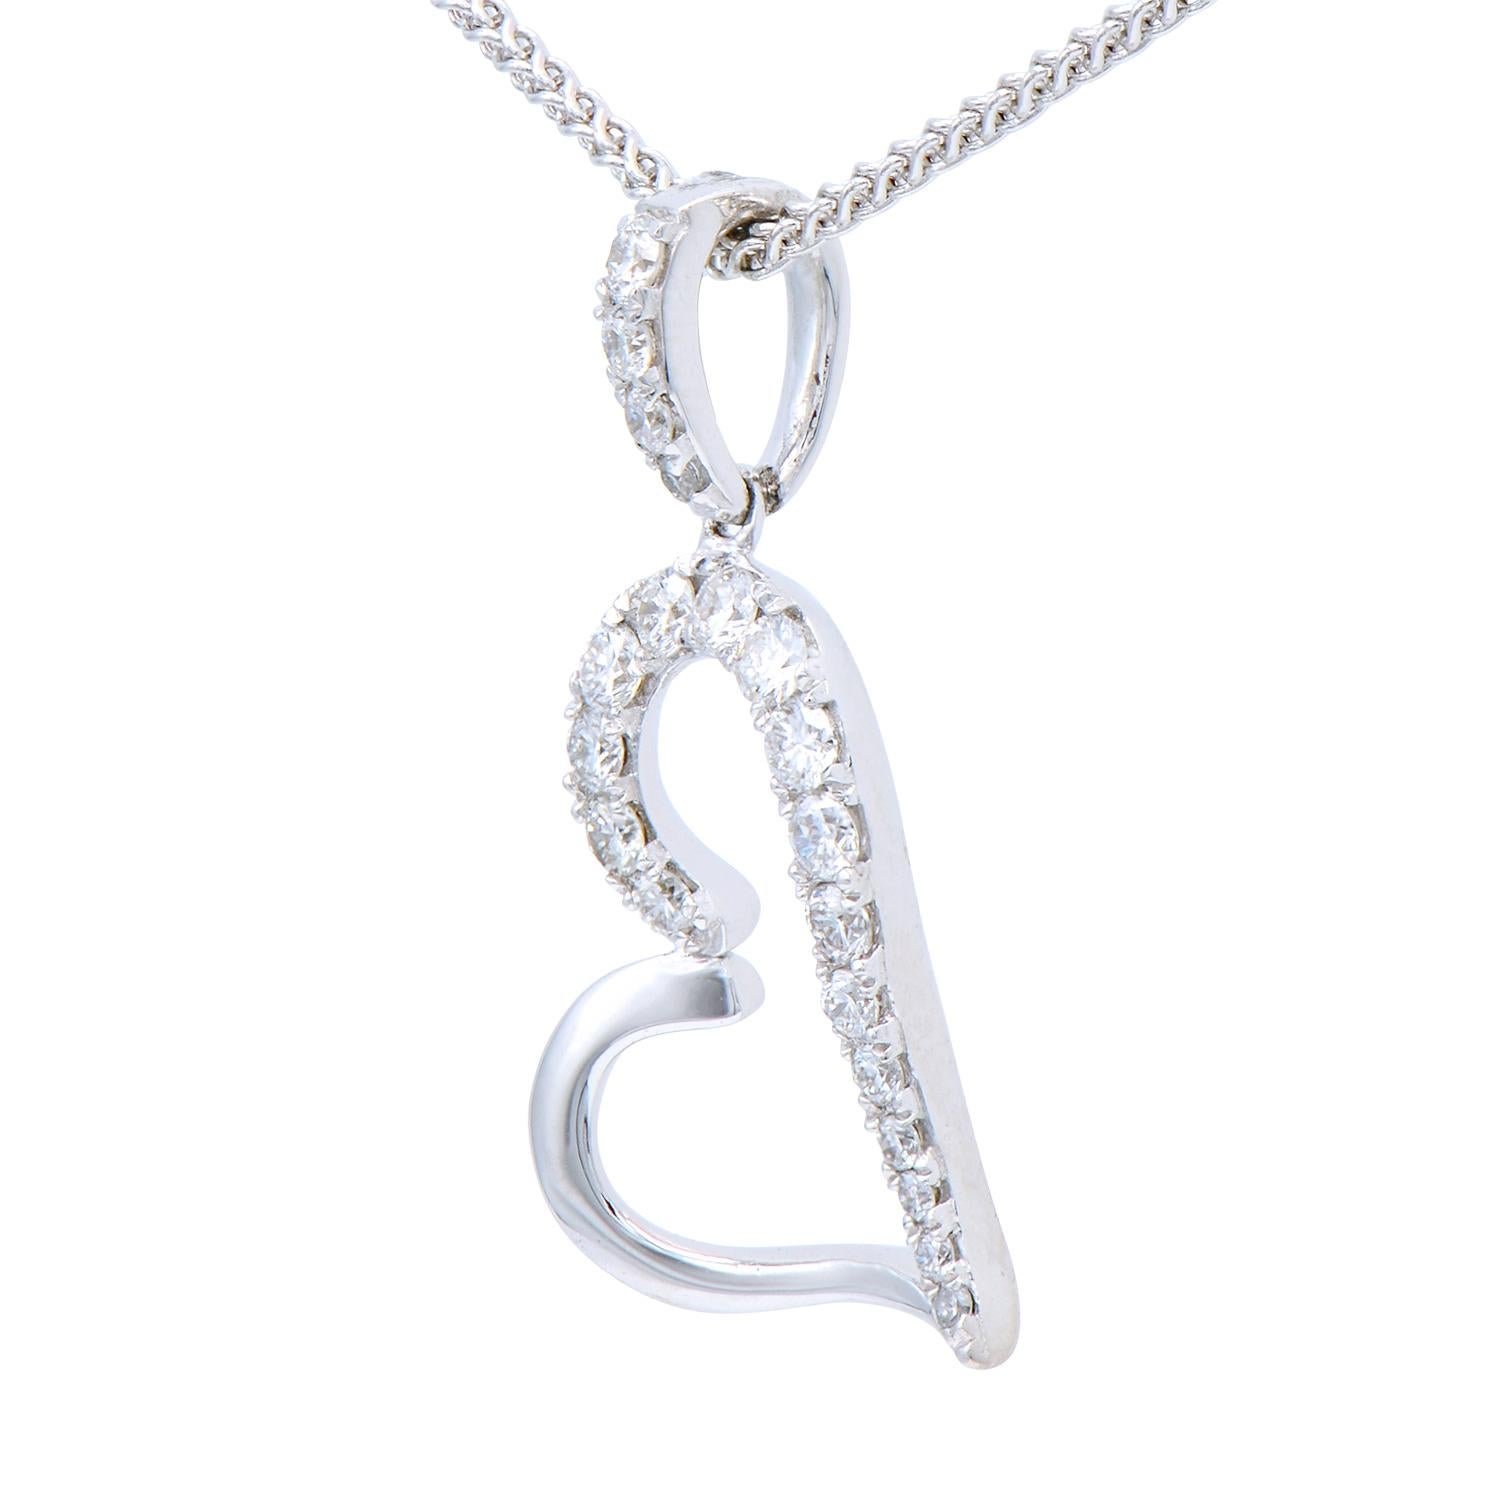 Show your love with this beautiful 14 karat white gold heart necklace enhanced with sparkling stunning diamonds. This pendant contains 20 round VS2, G color diamonds with a total of 0.24 carats, which are set in 0.9 grams of 14 karat white gold.